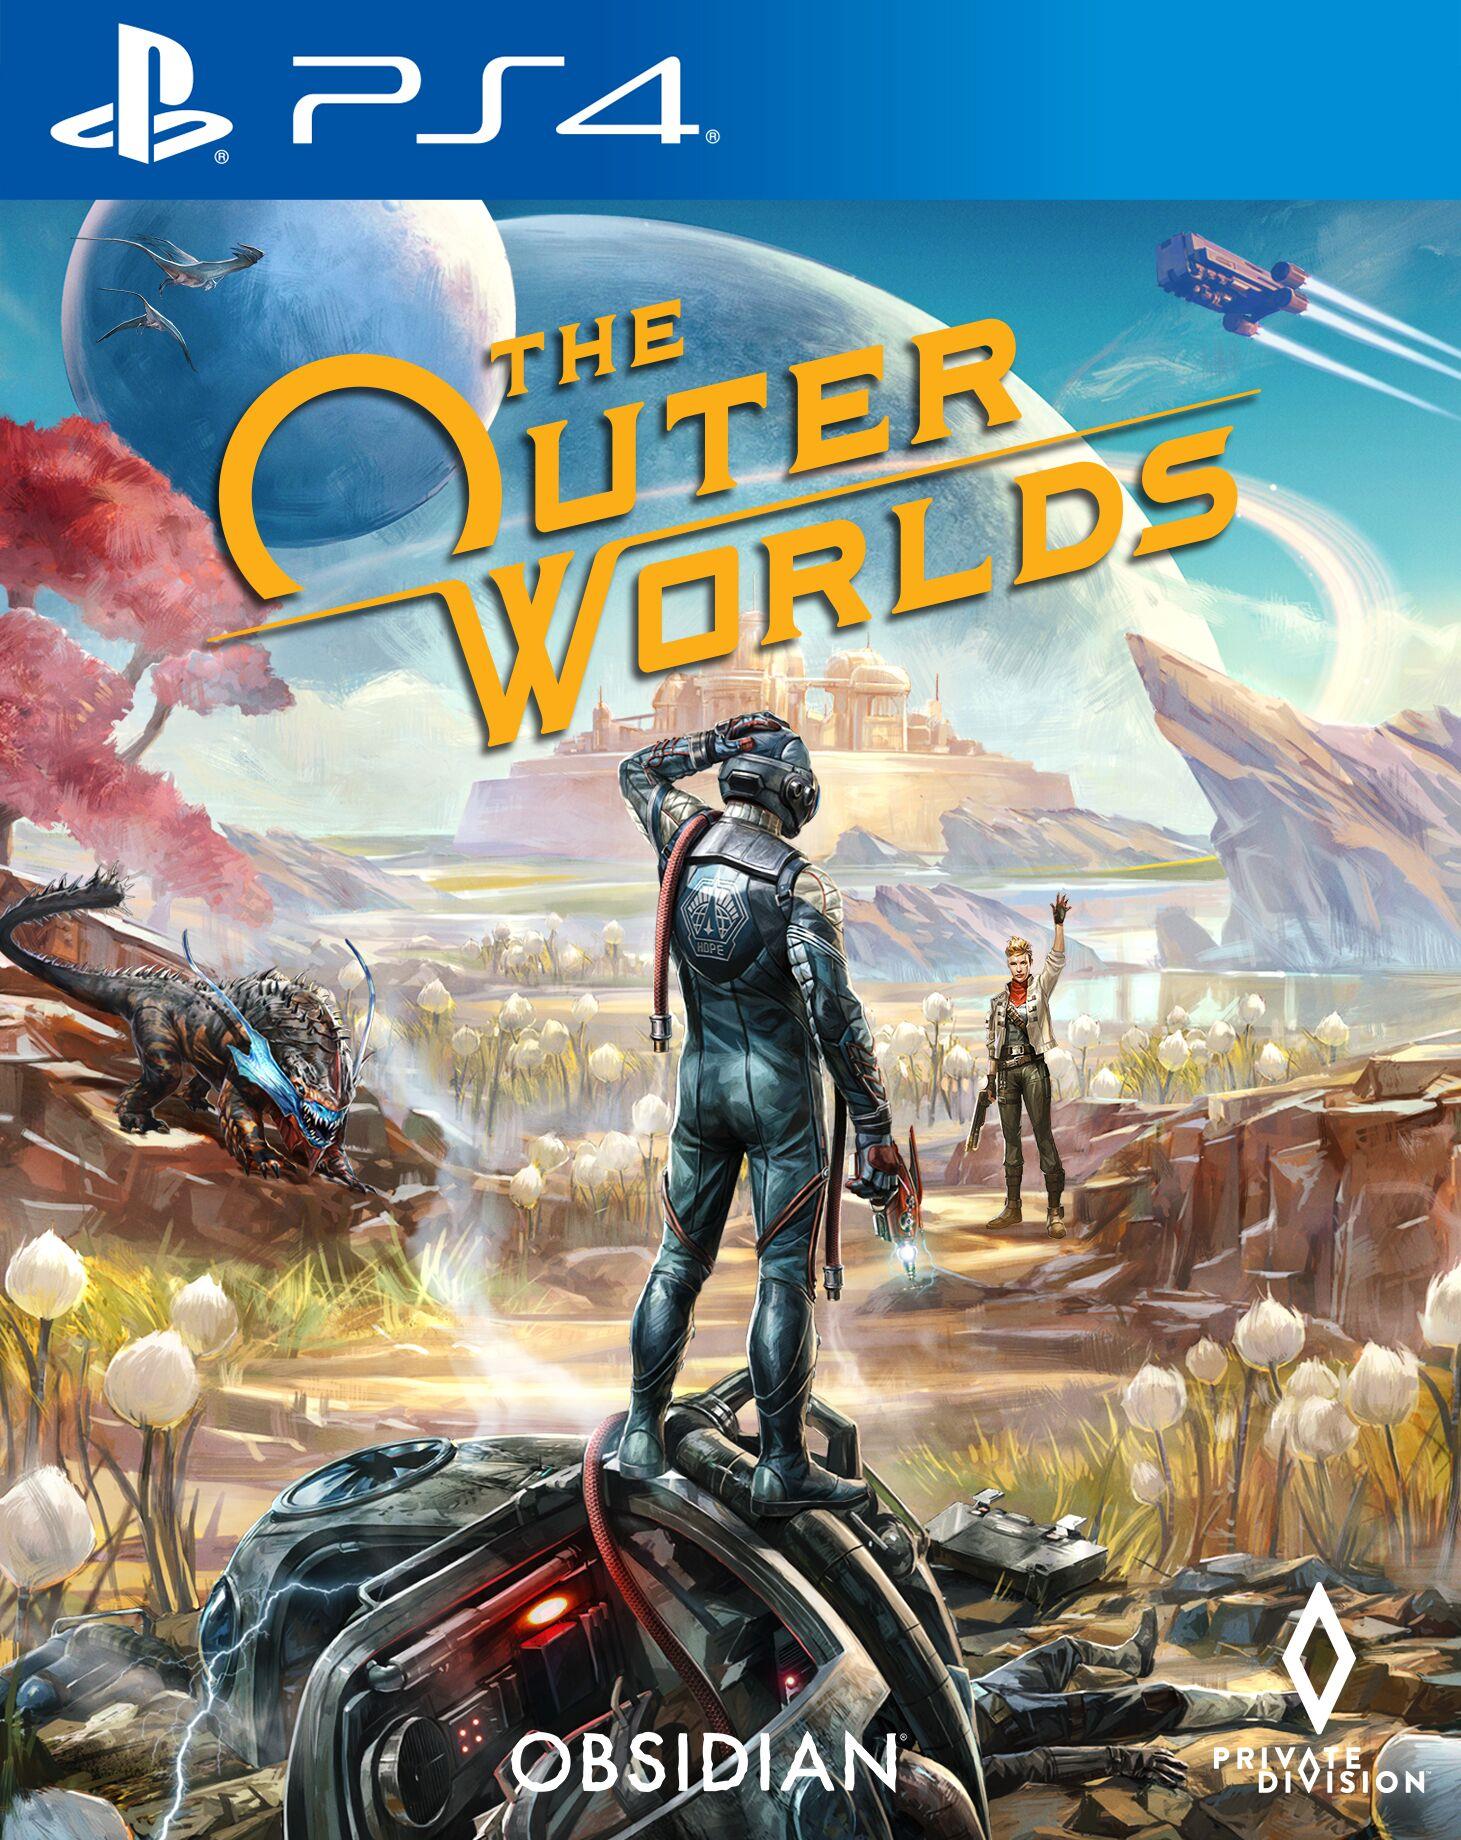 § The Outer Worlds